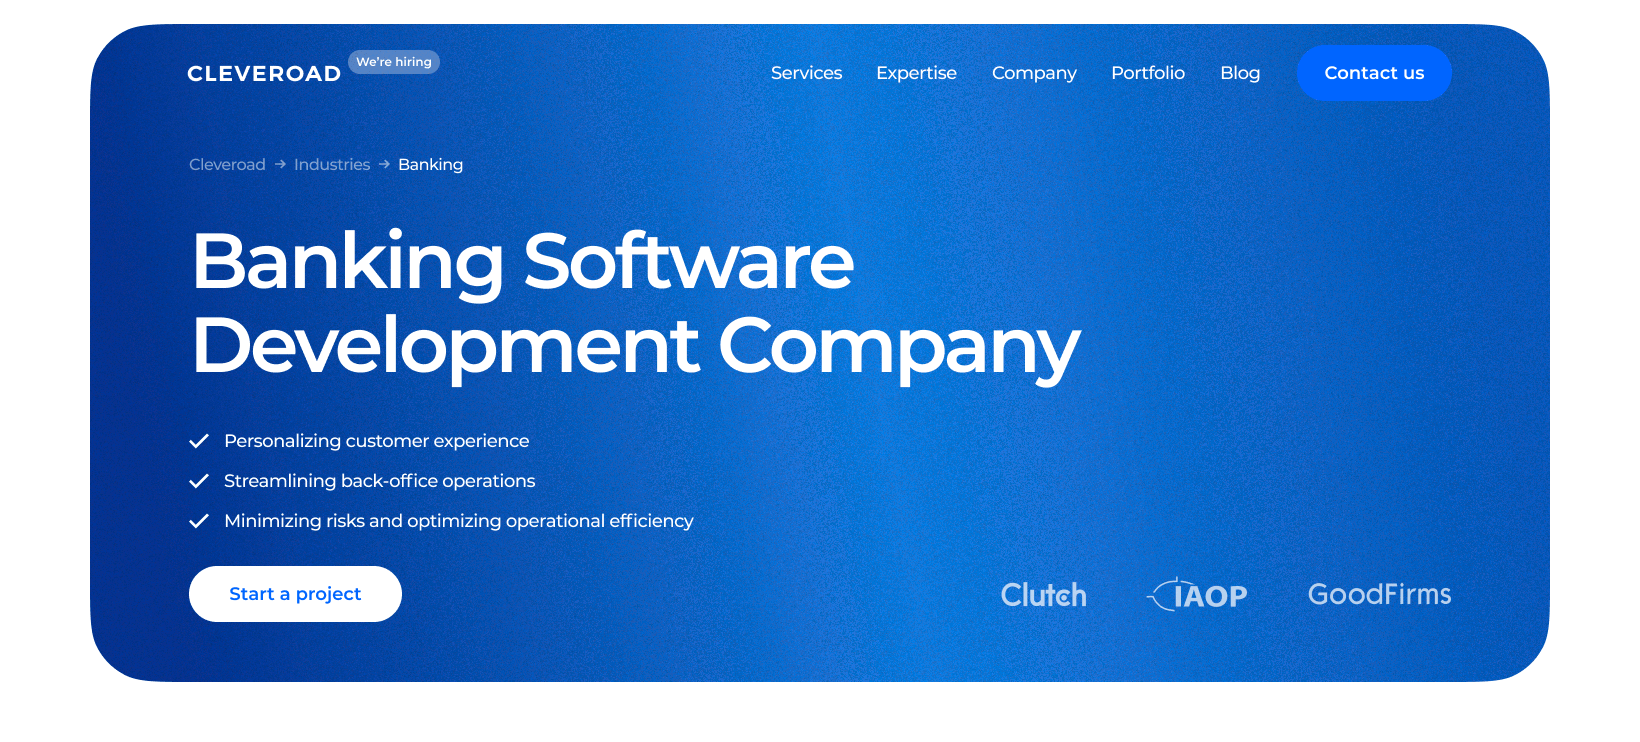 Banking Software Development Company | Cleveroad